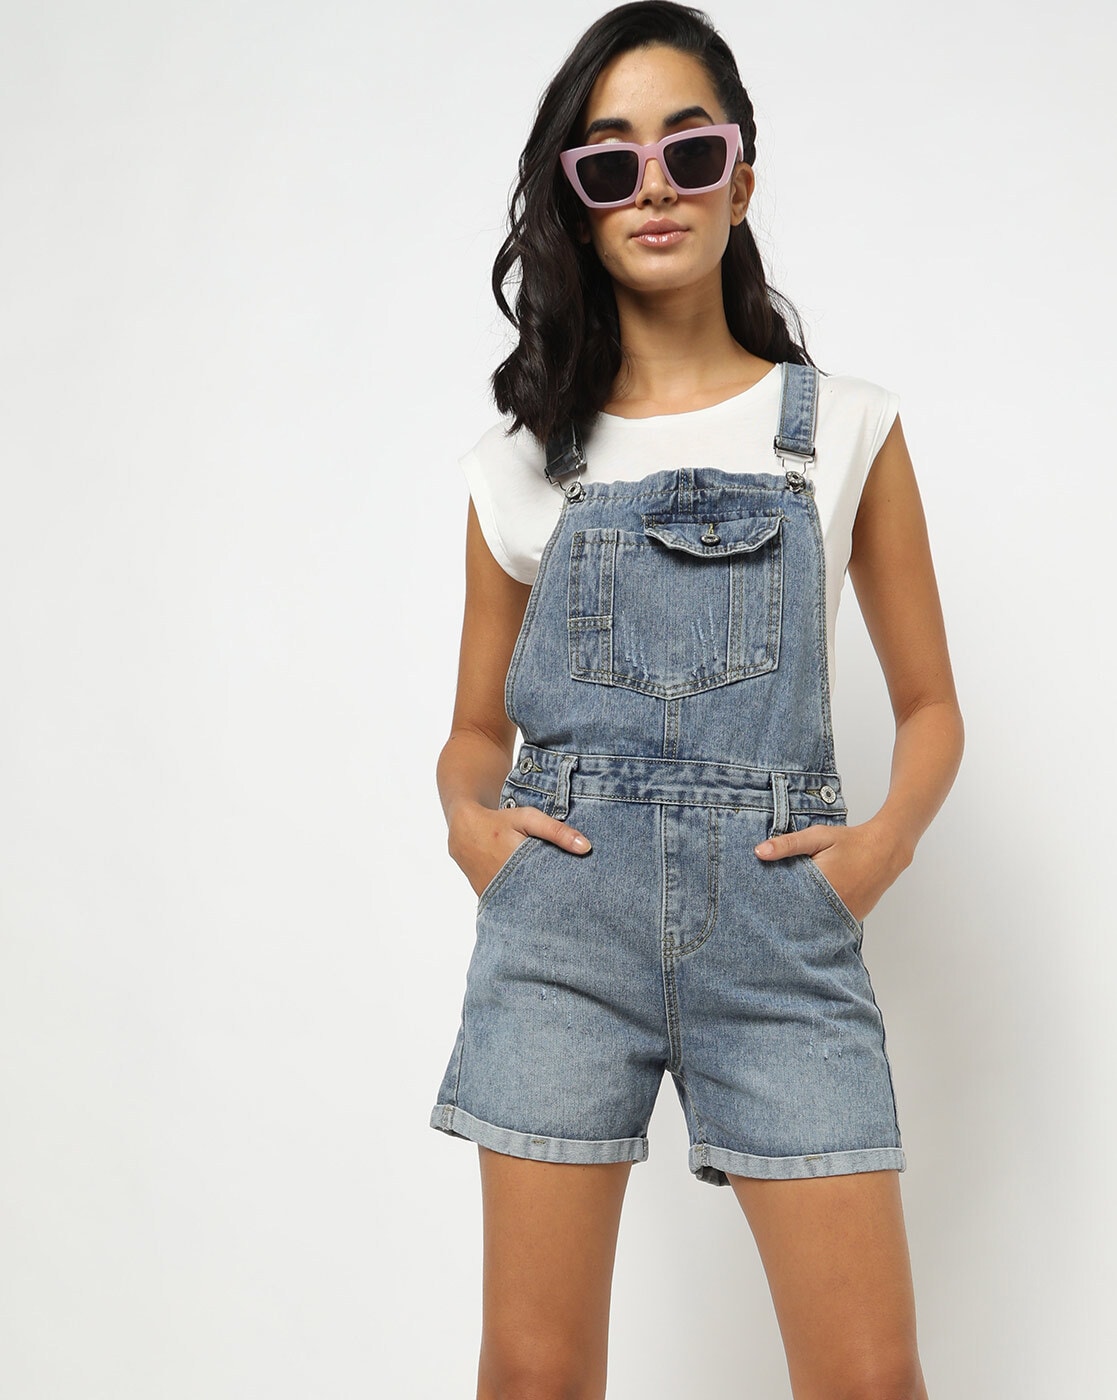 How to wear denim short overalls two ways